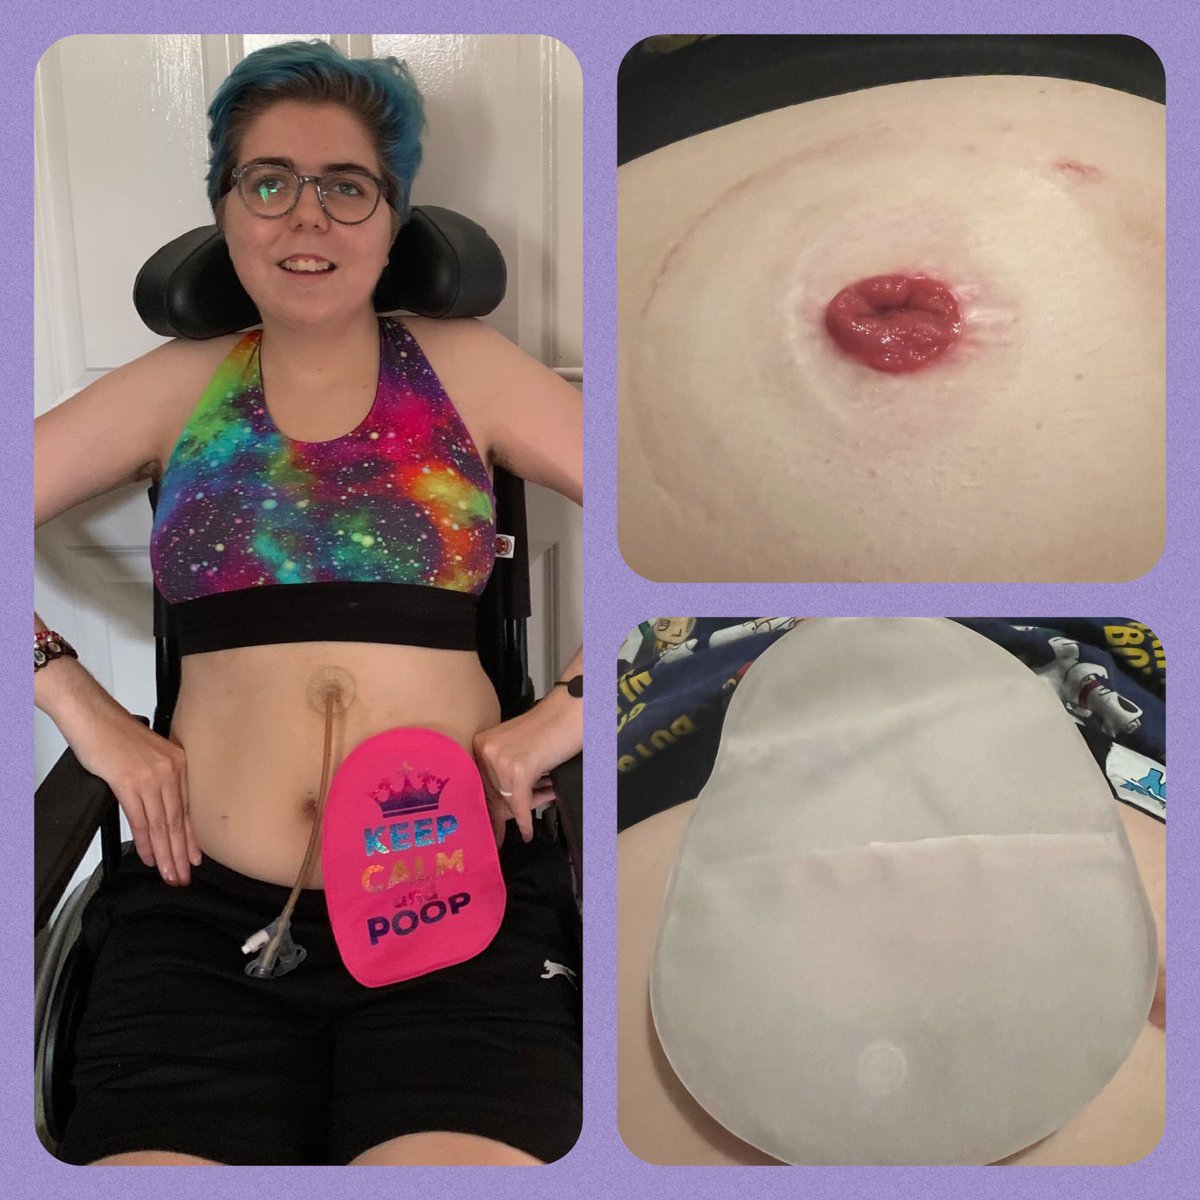 Today is #StomaAware Day are you STOMA aware ? I’ve had my STOMA since June 2021, let break down the barriers and be STOMA aware. Let’s break the social exclusion on STOMAS ! Let’s be STOMA positive and AWARE. #Stomaawarenessday #Ostomy #Stoma #Colostomy #Breakdownbarriers